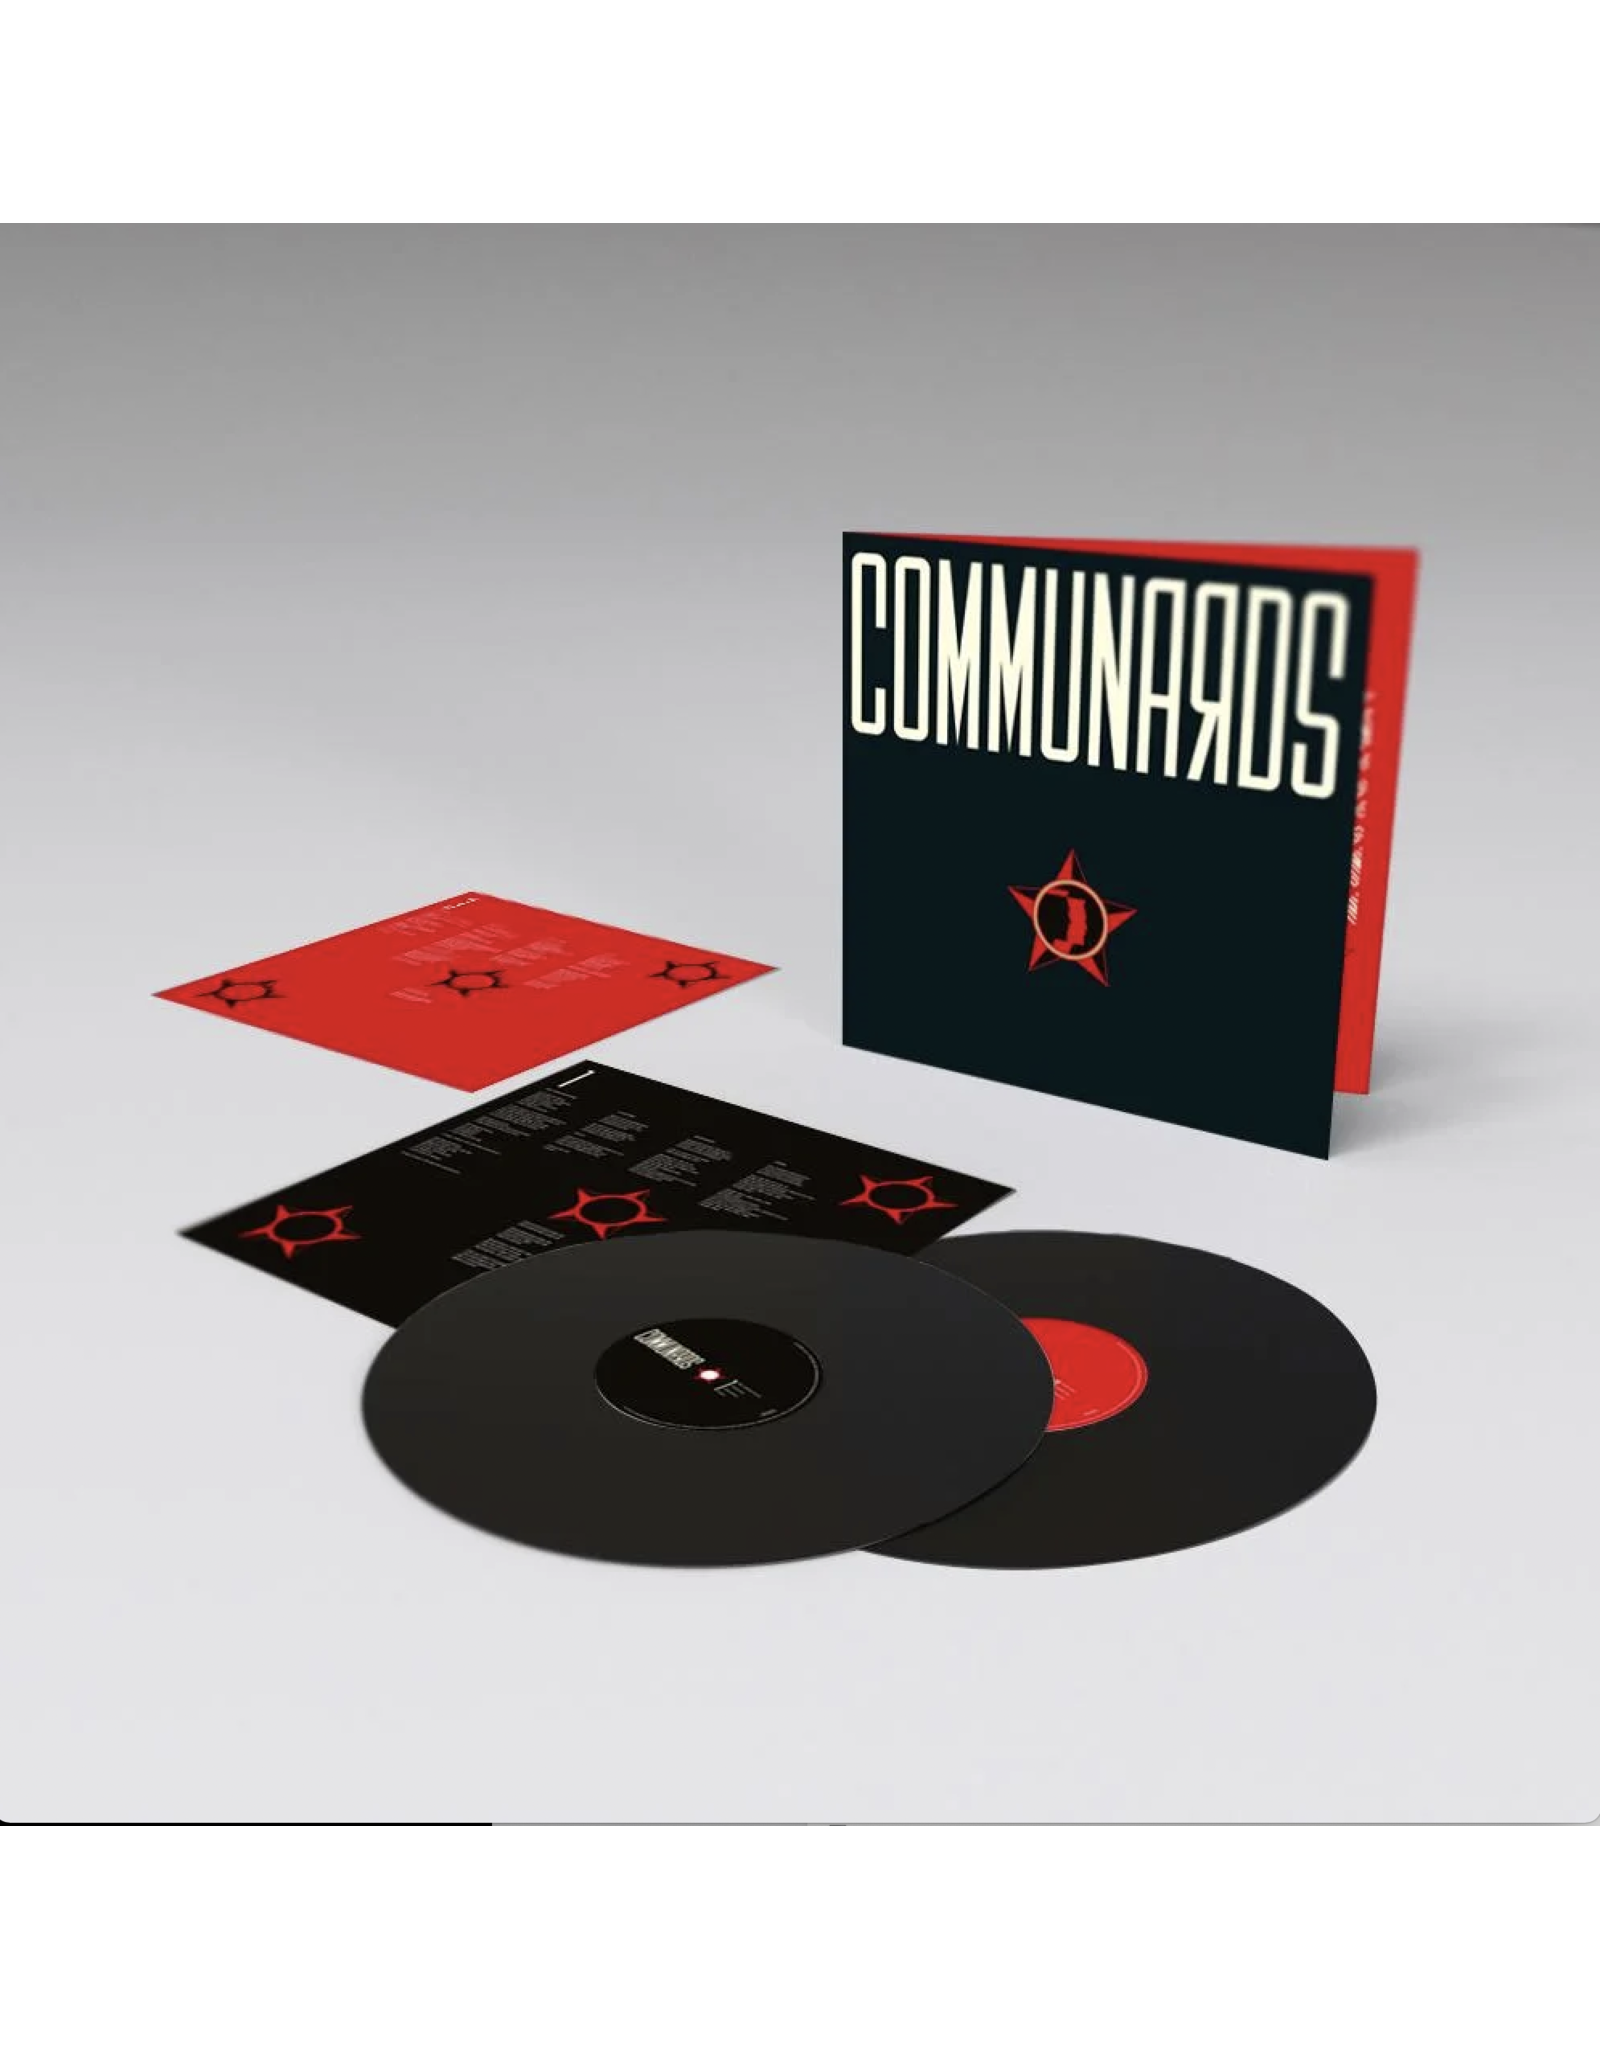 Communards - The Communards (35th Anniversary Deluxe Edition)